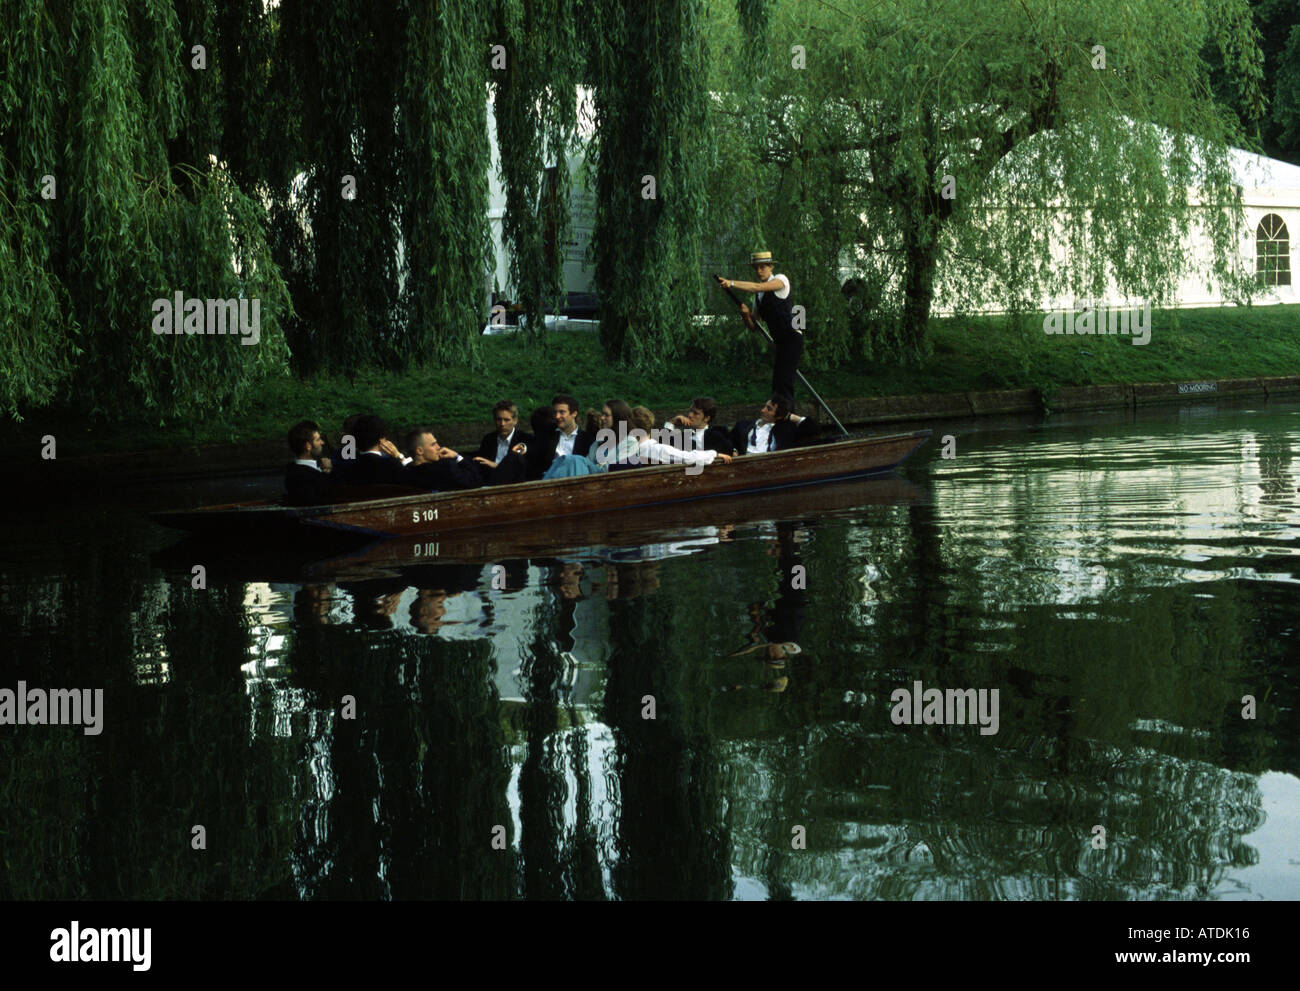 Trinity May Ball revellers enjoying a boat ride on the river Cam Stock Photo